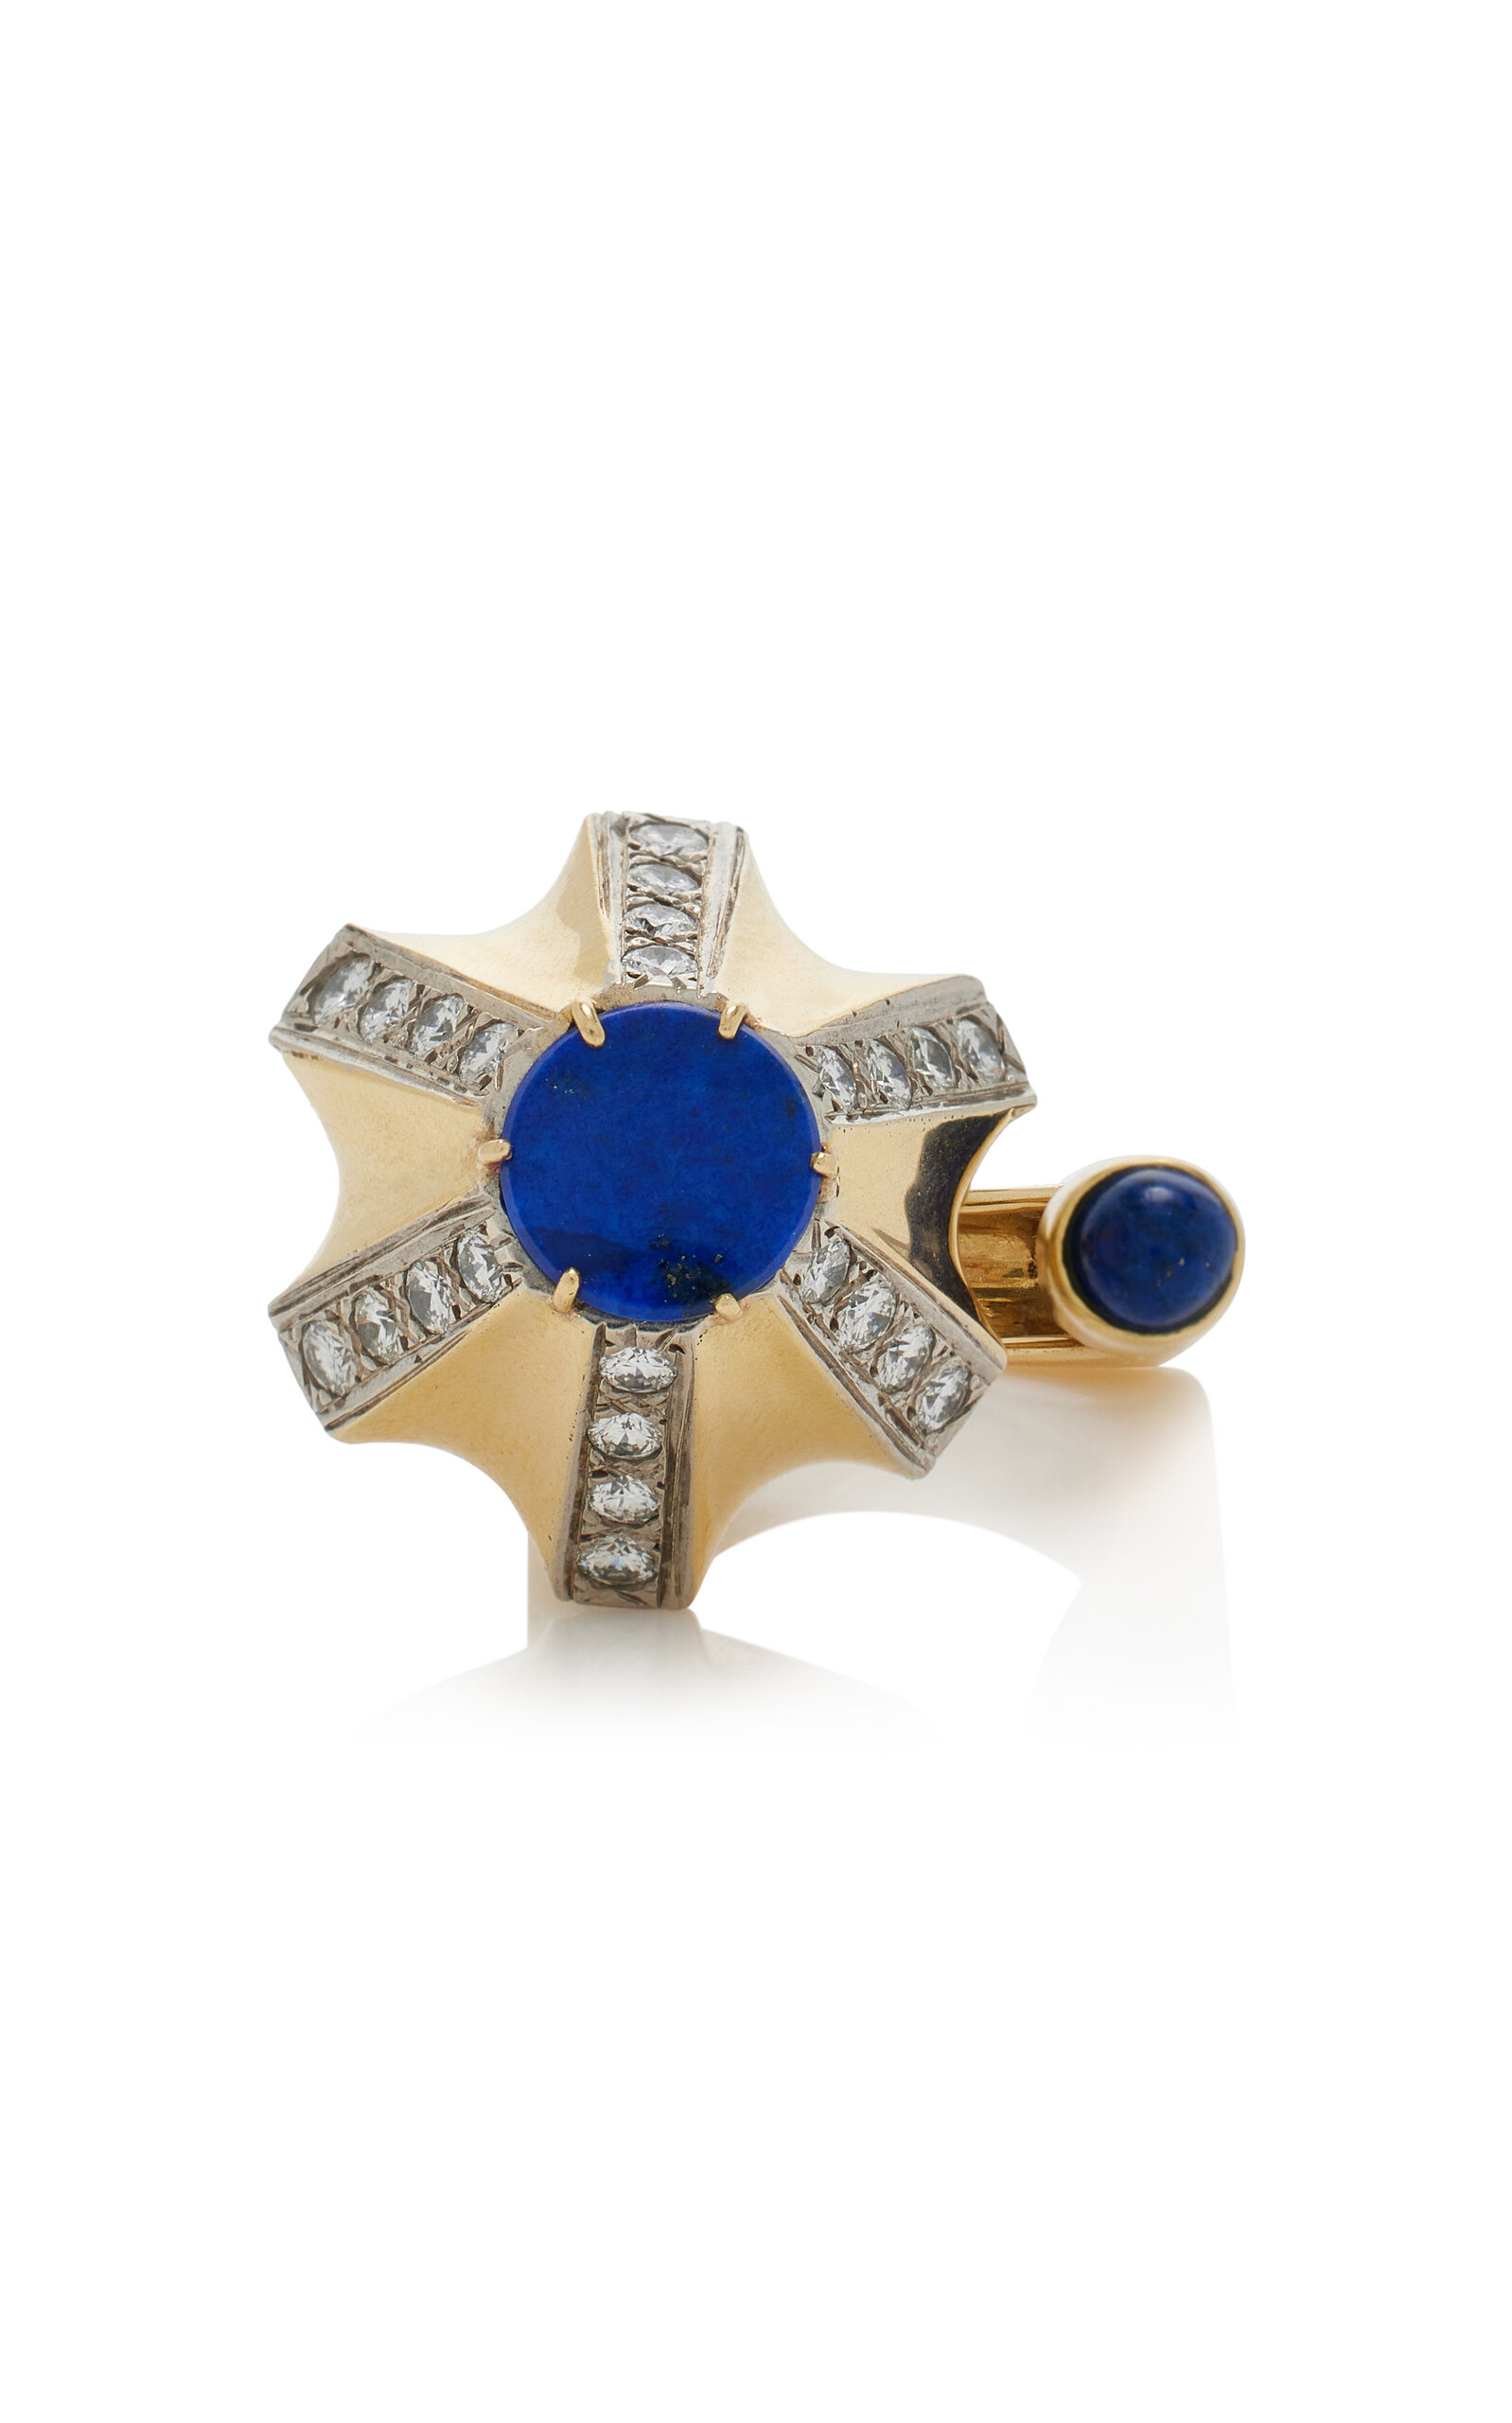 Kentshire One-of-a-kind Dinh Van For Cartier 18k Yellow Gold Lapis; Diamond Ring